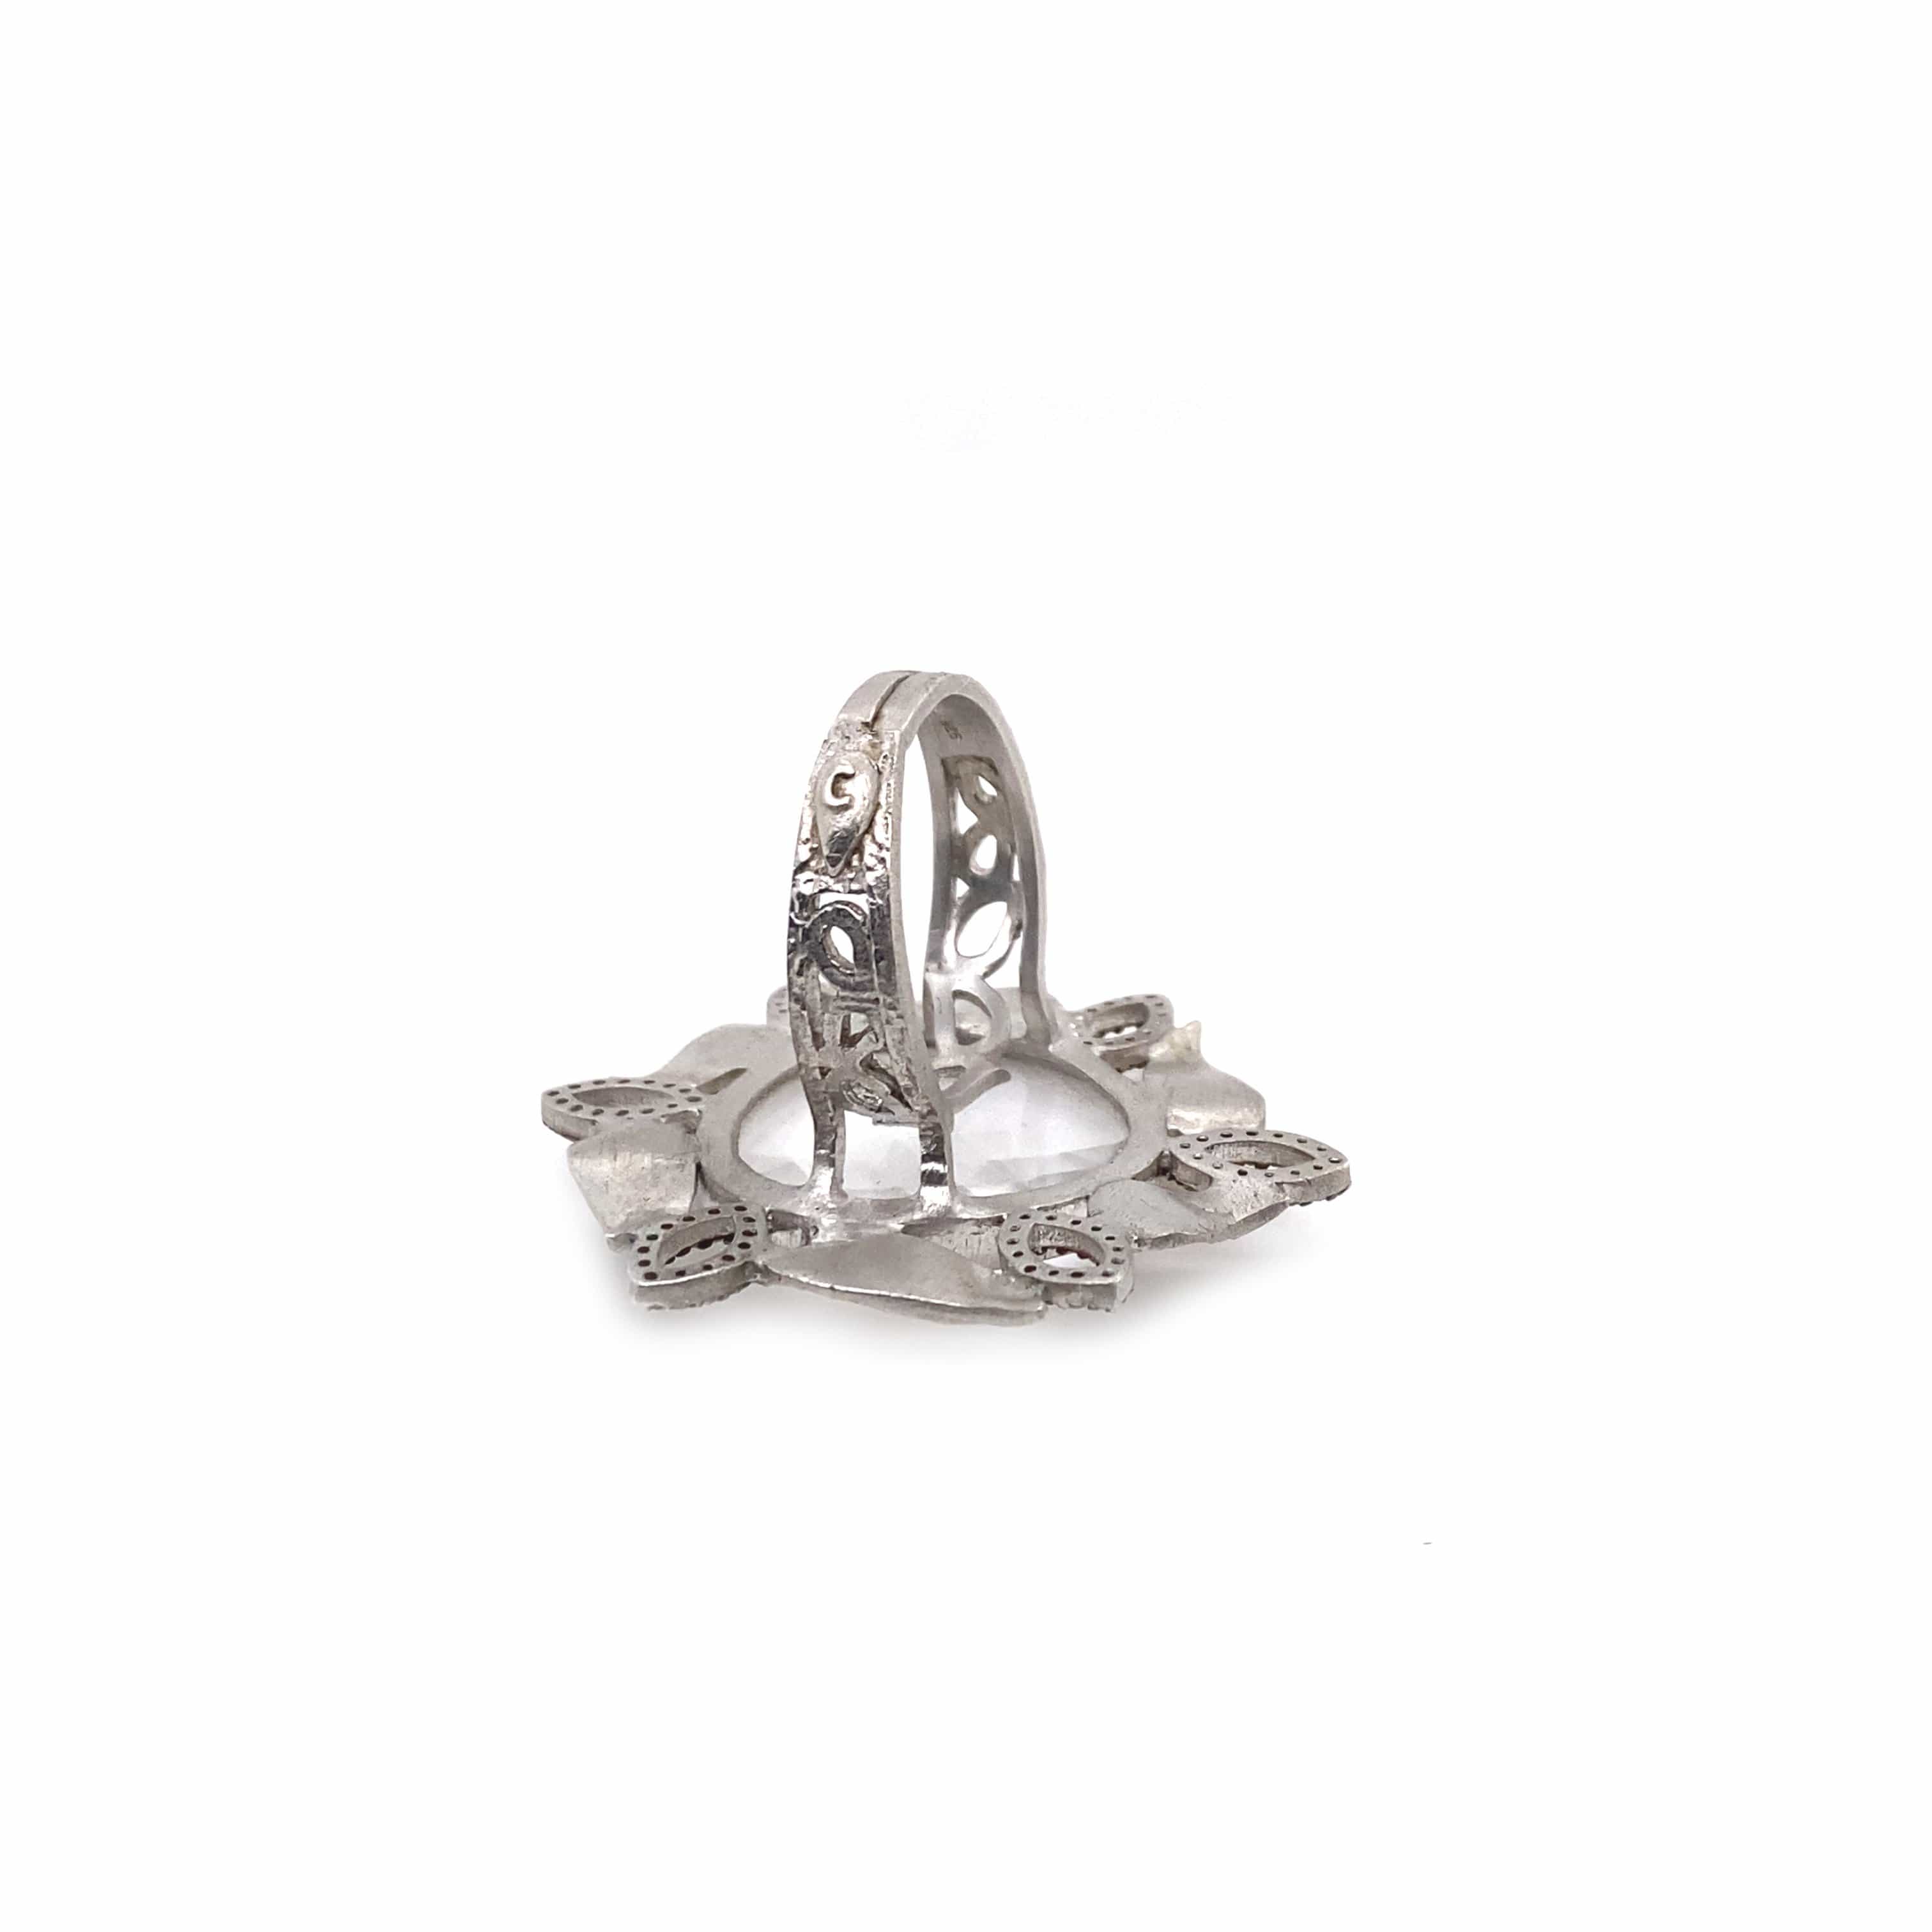 Vitality Sterling Silver and Gold Leaf Ring - Coomi